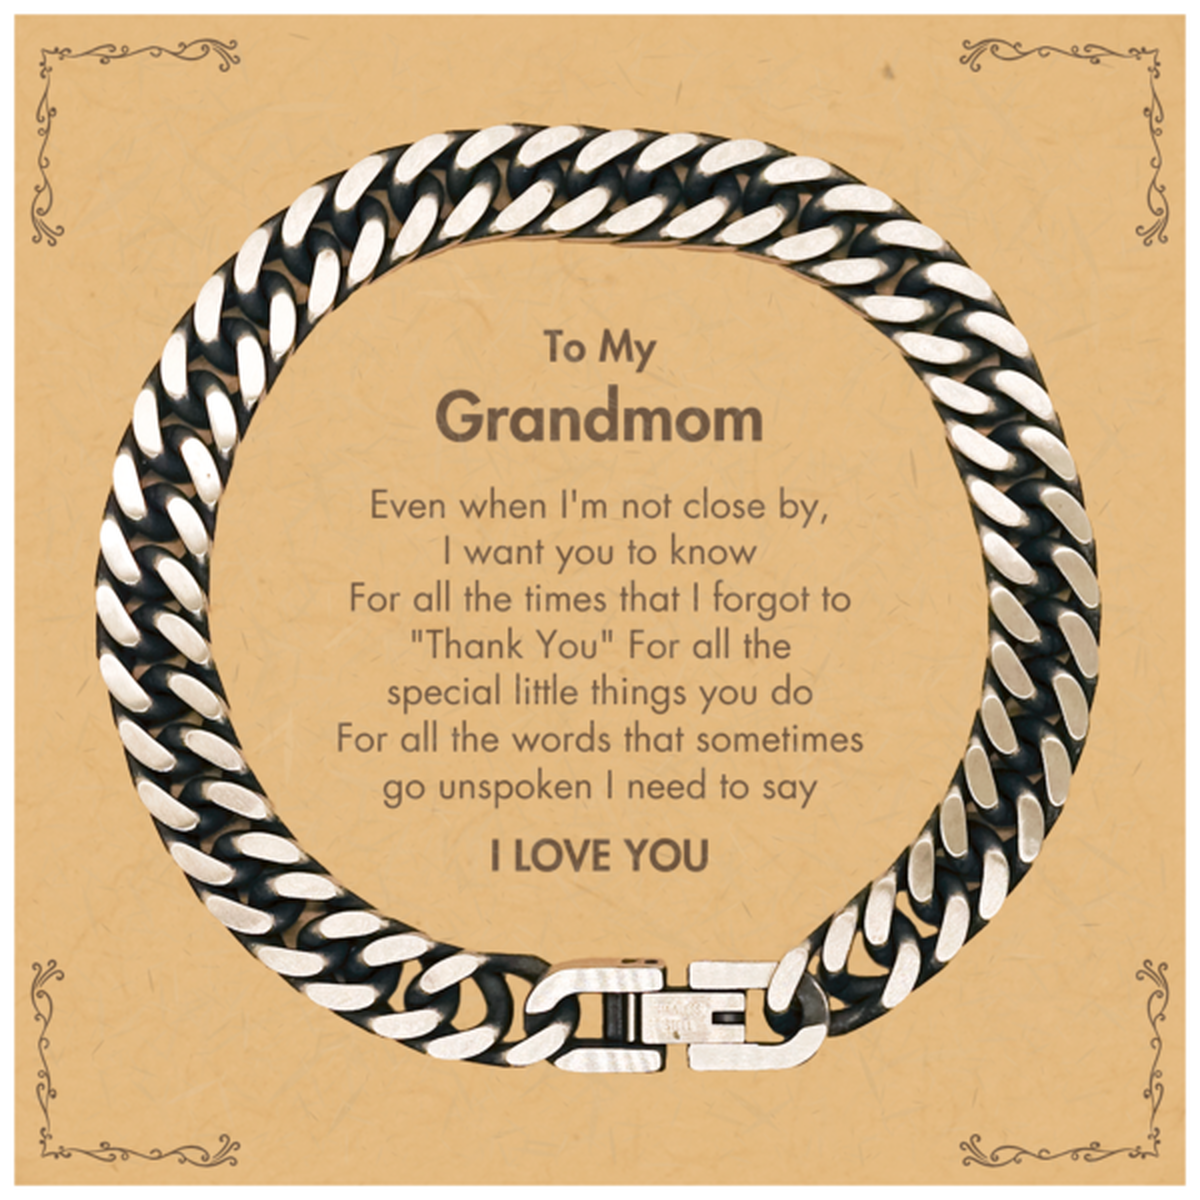 Thank You Gifts for Grandmom, Keepsake Cuban Link Chain Bracelet Gifts for Grandmom Birthday Mother's day Father's Day Grandmom For all the words That sometimes go unspoken I need to say I LOVE YOU